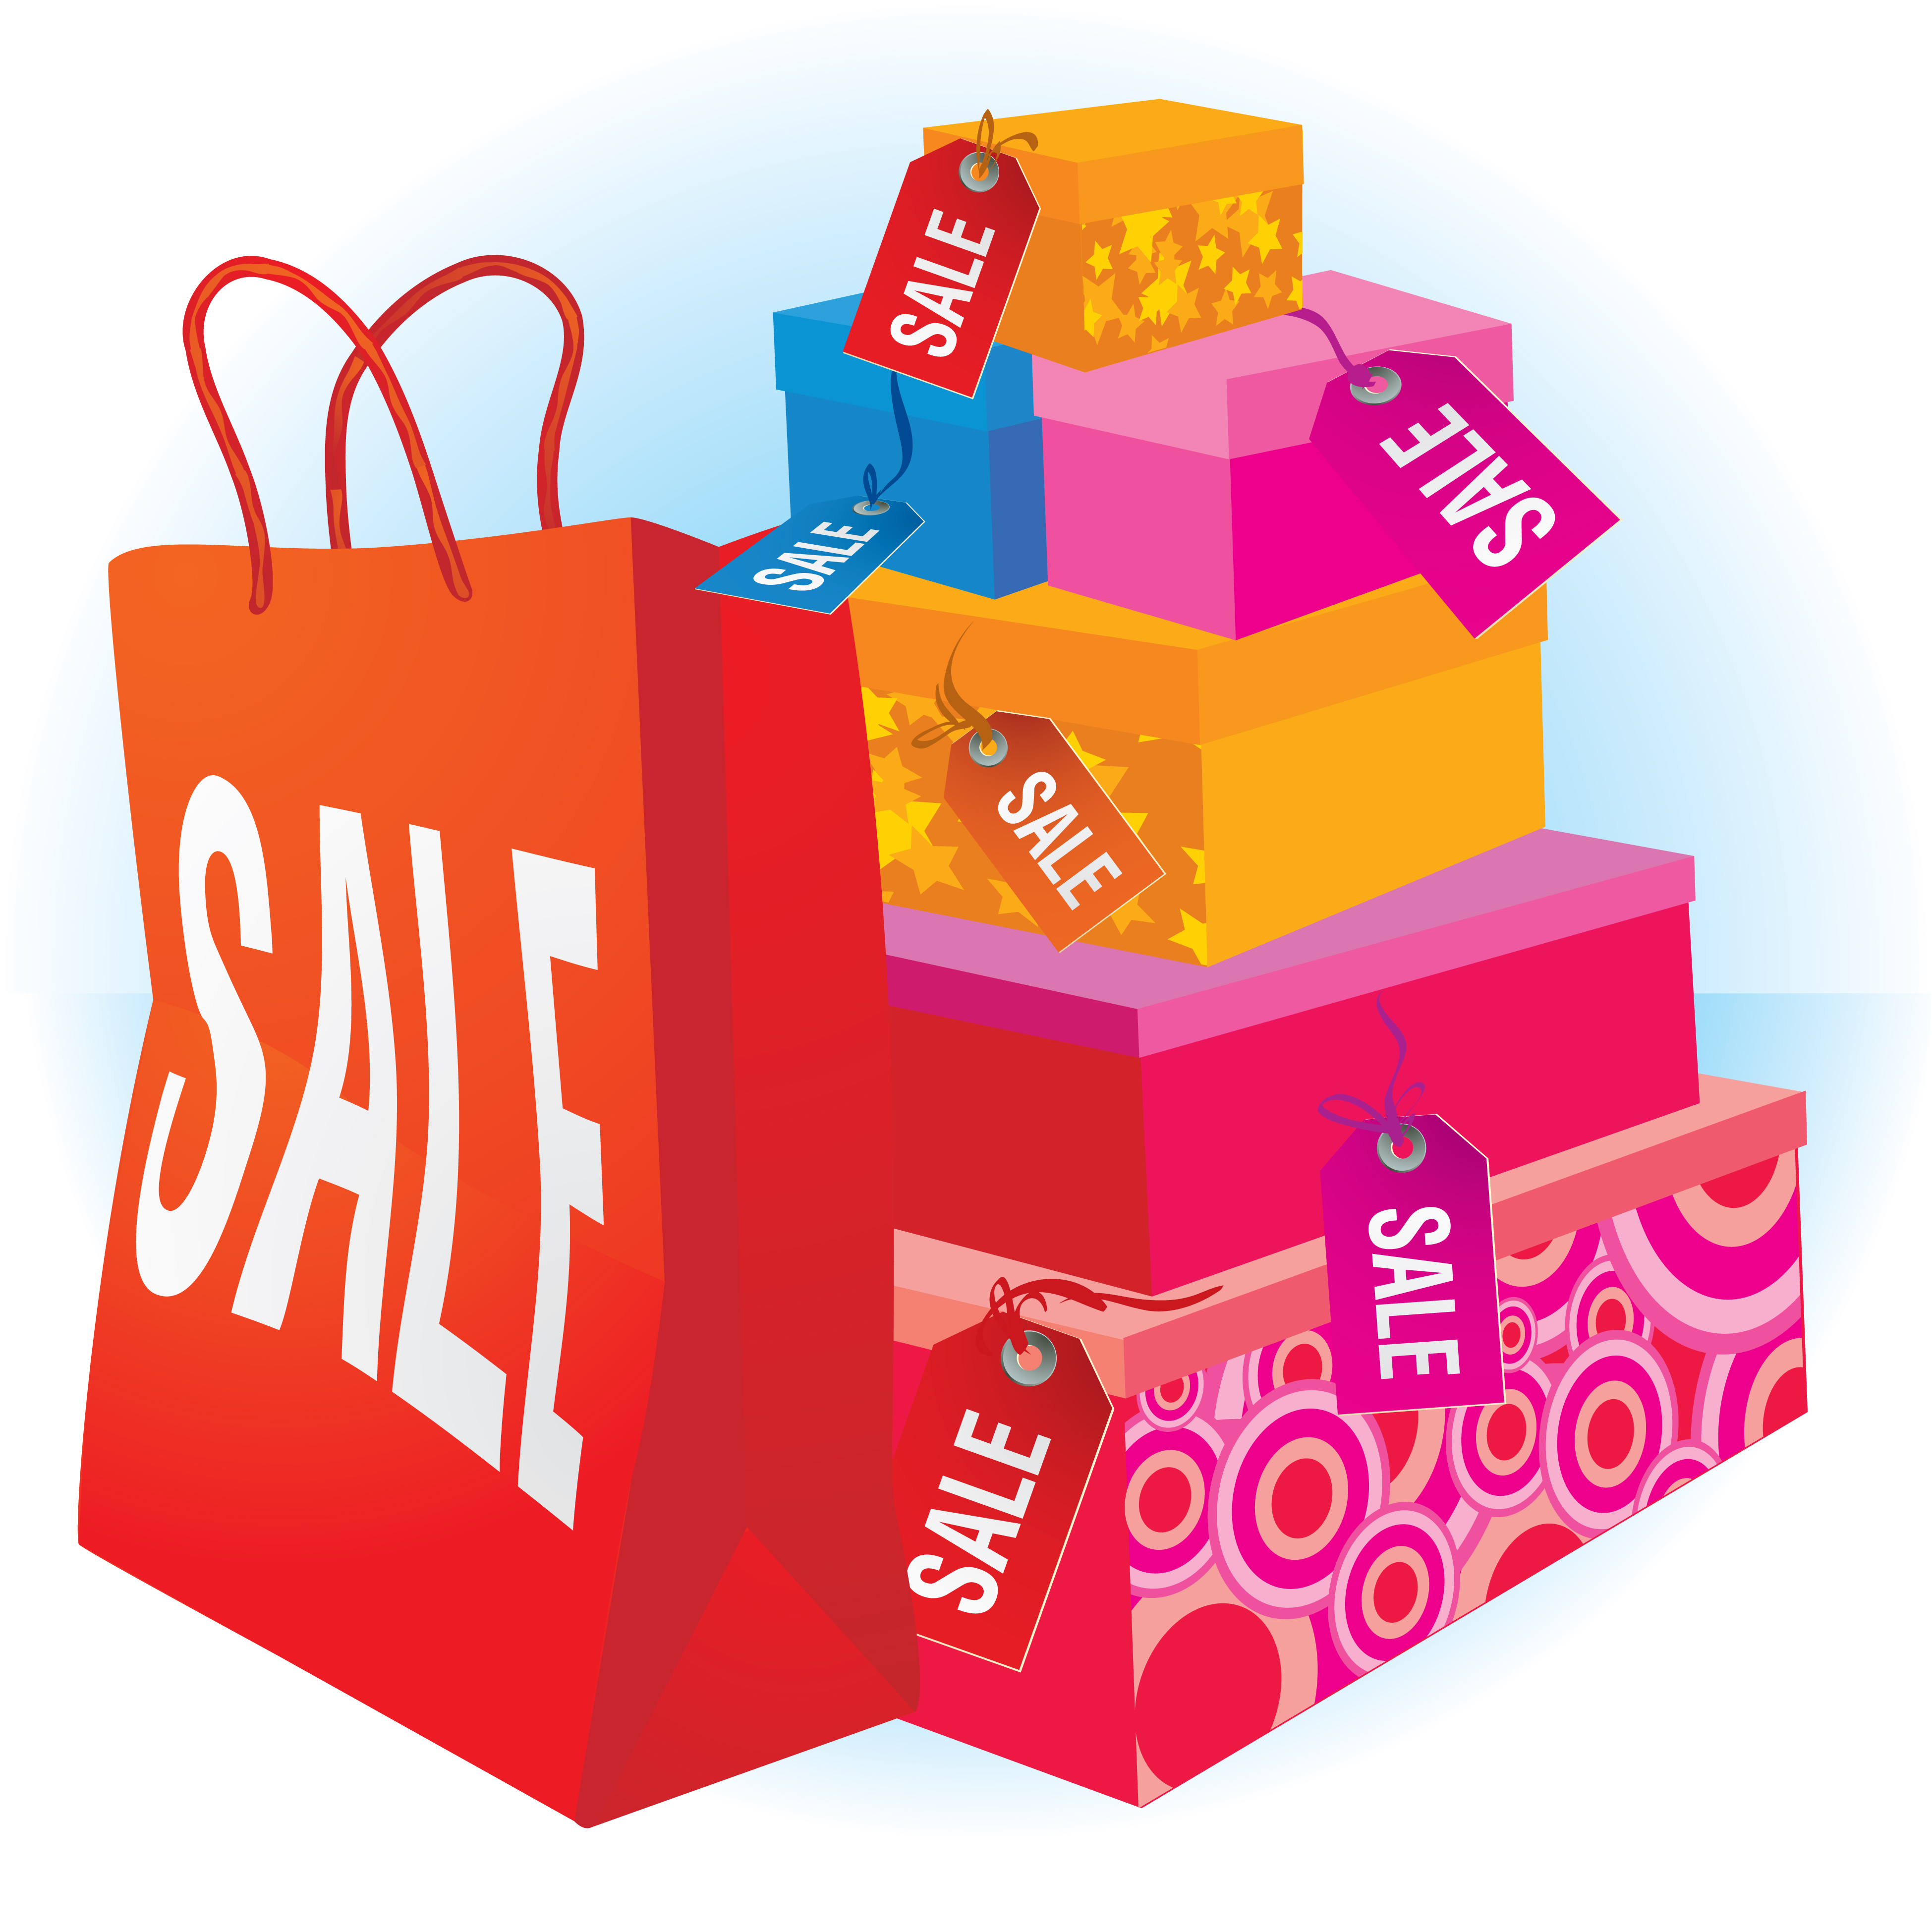 7 Ways to Land Black Friday Shopping Deals - SellCell.com Blog